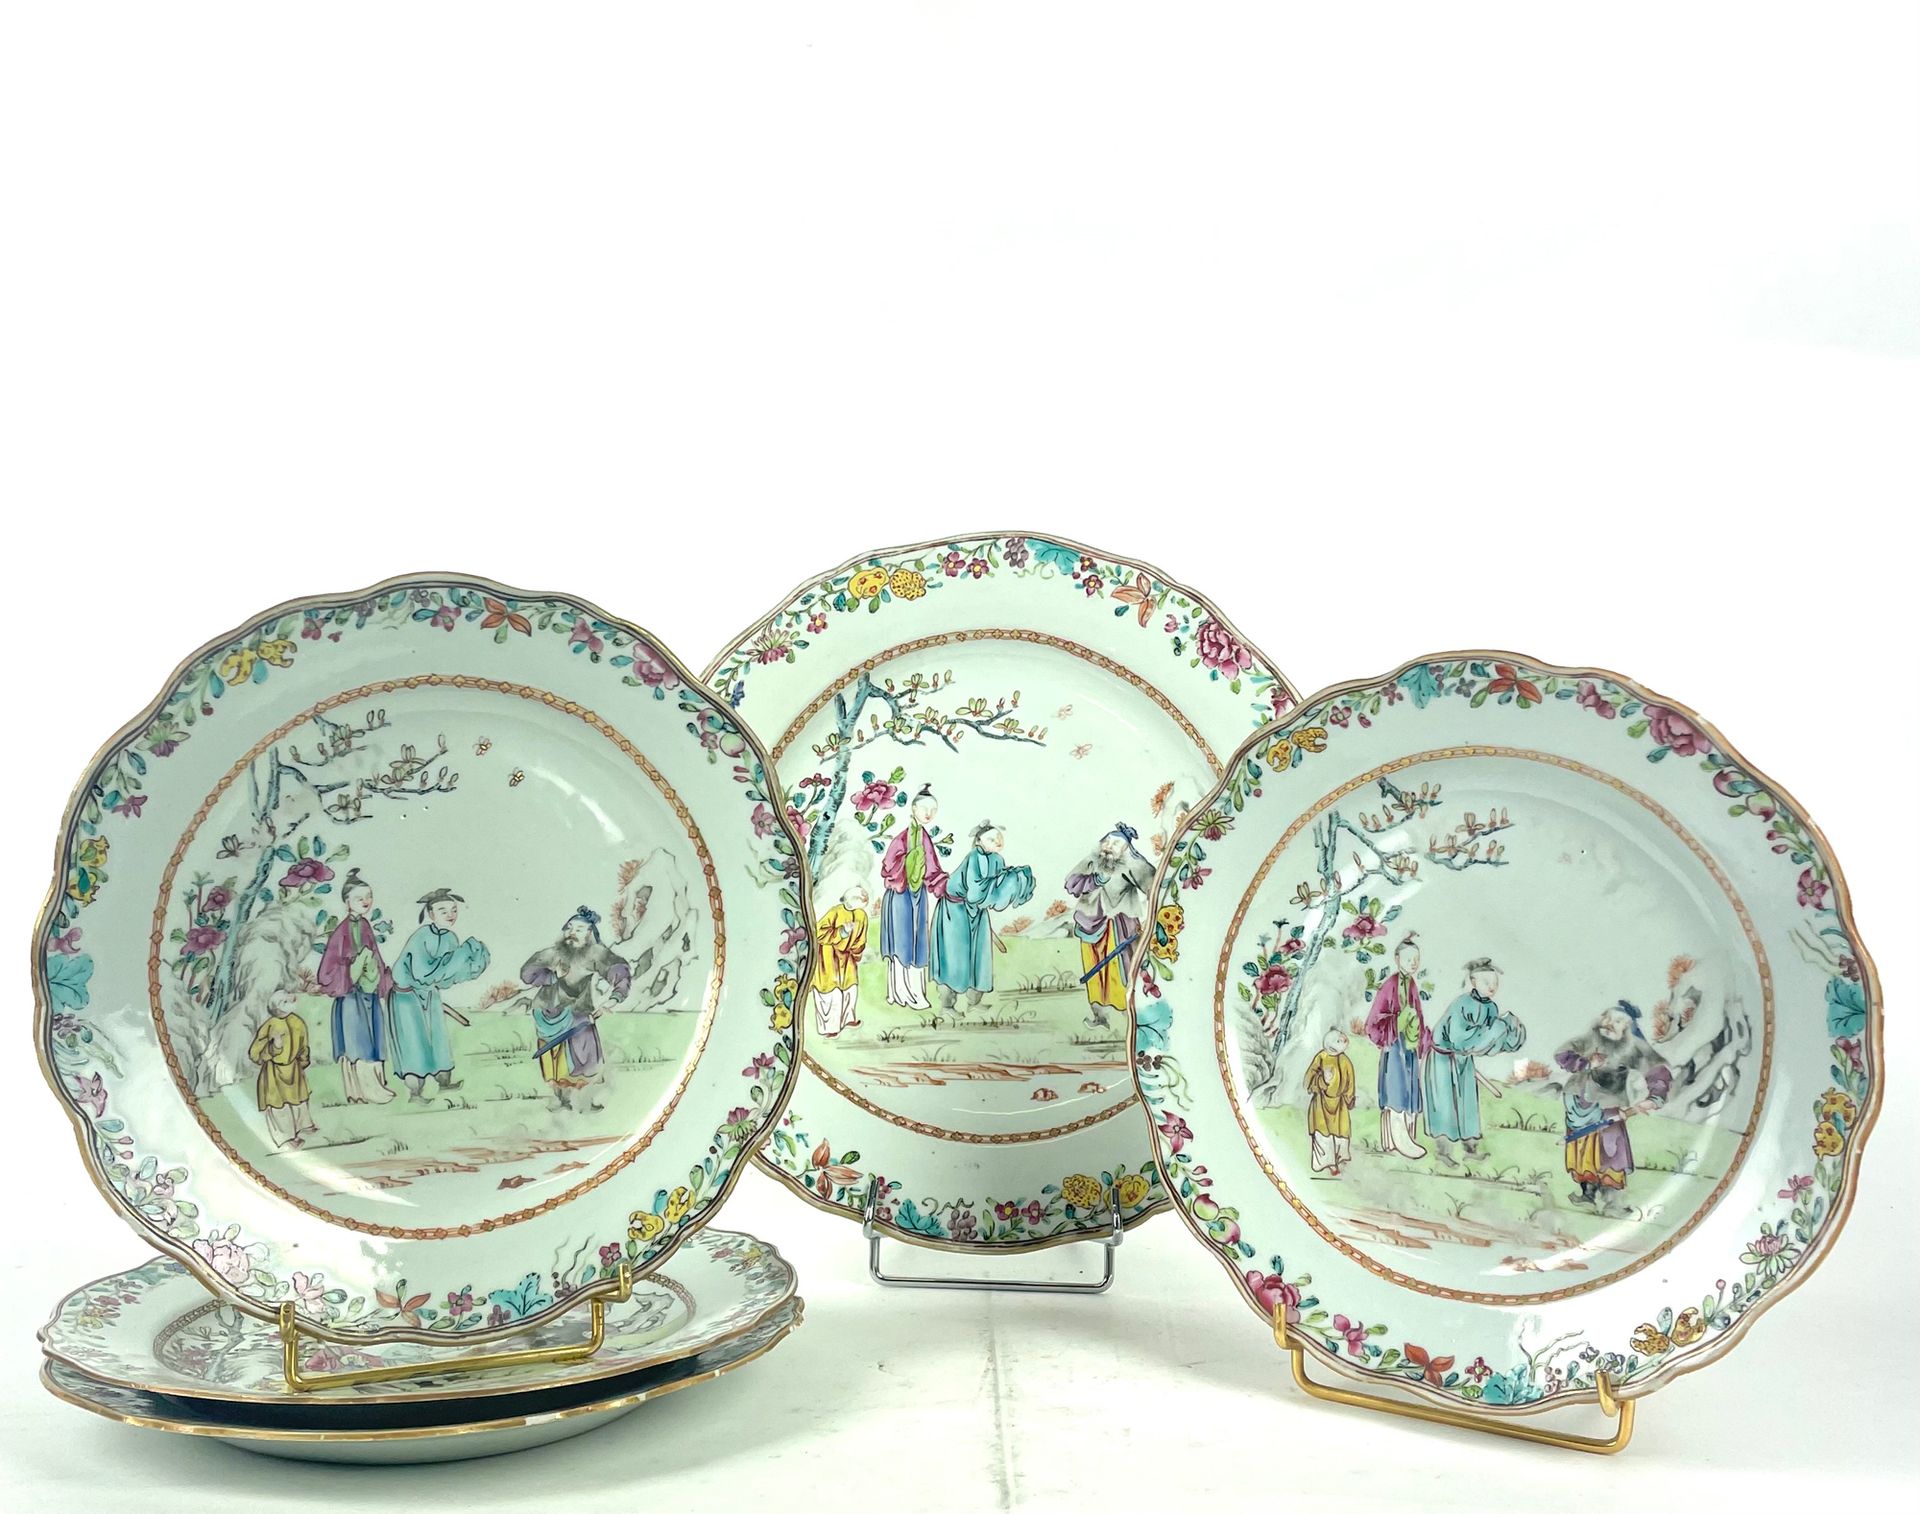 Null COMPAGNIE DES INDES Four plates and a round dish with a seamed edge in Chin&hellip;